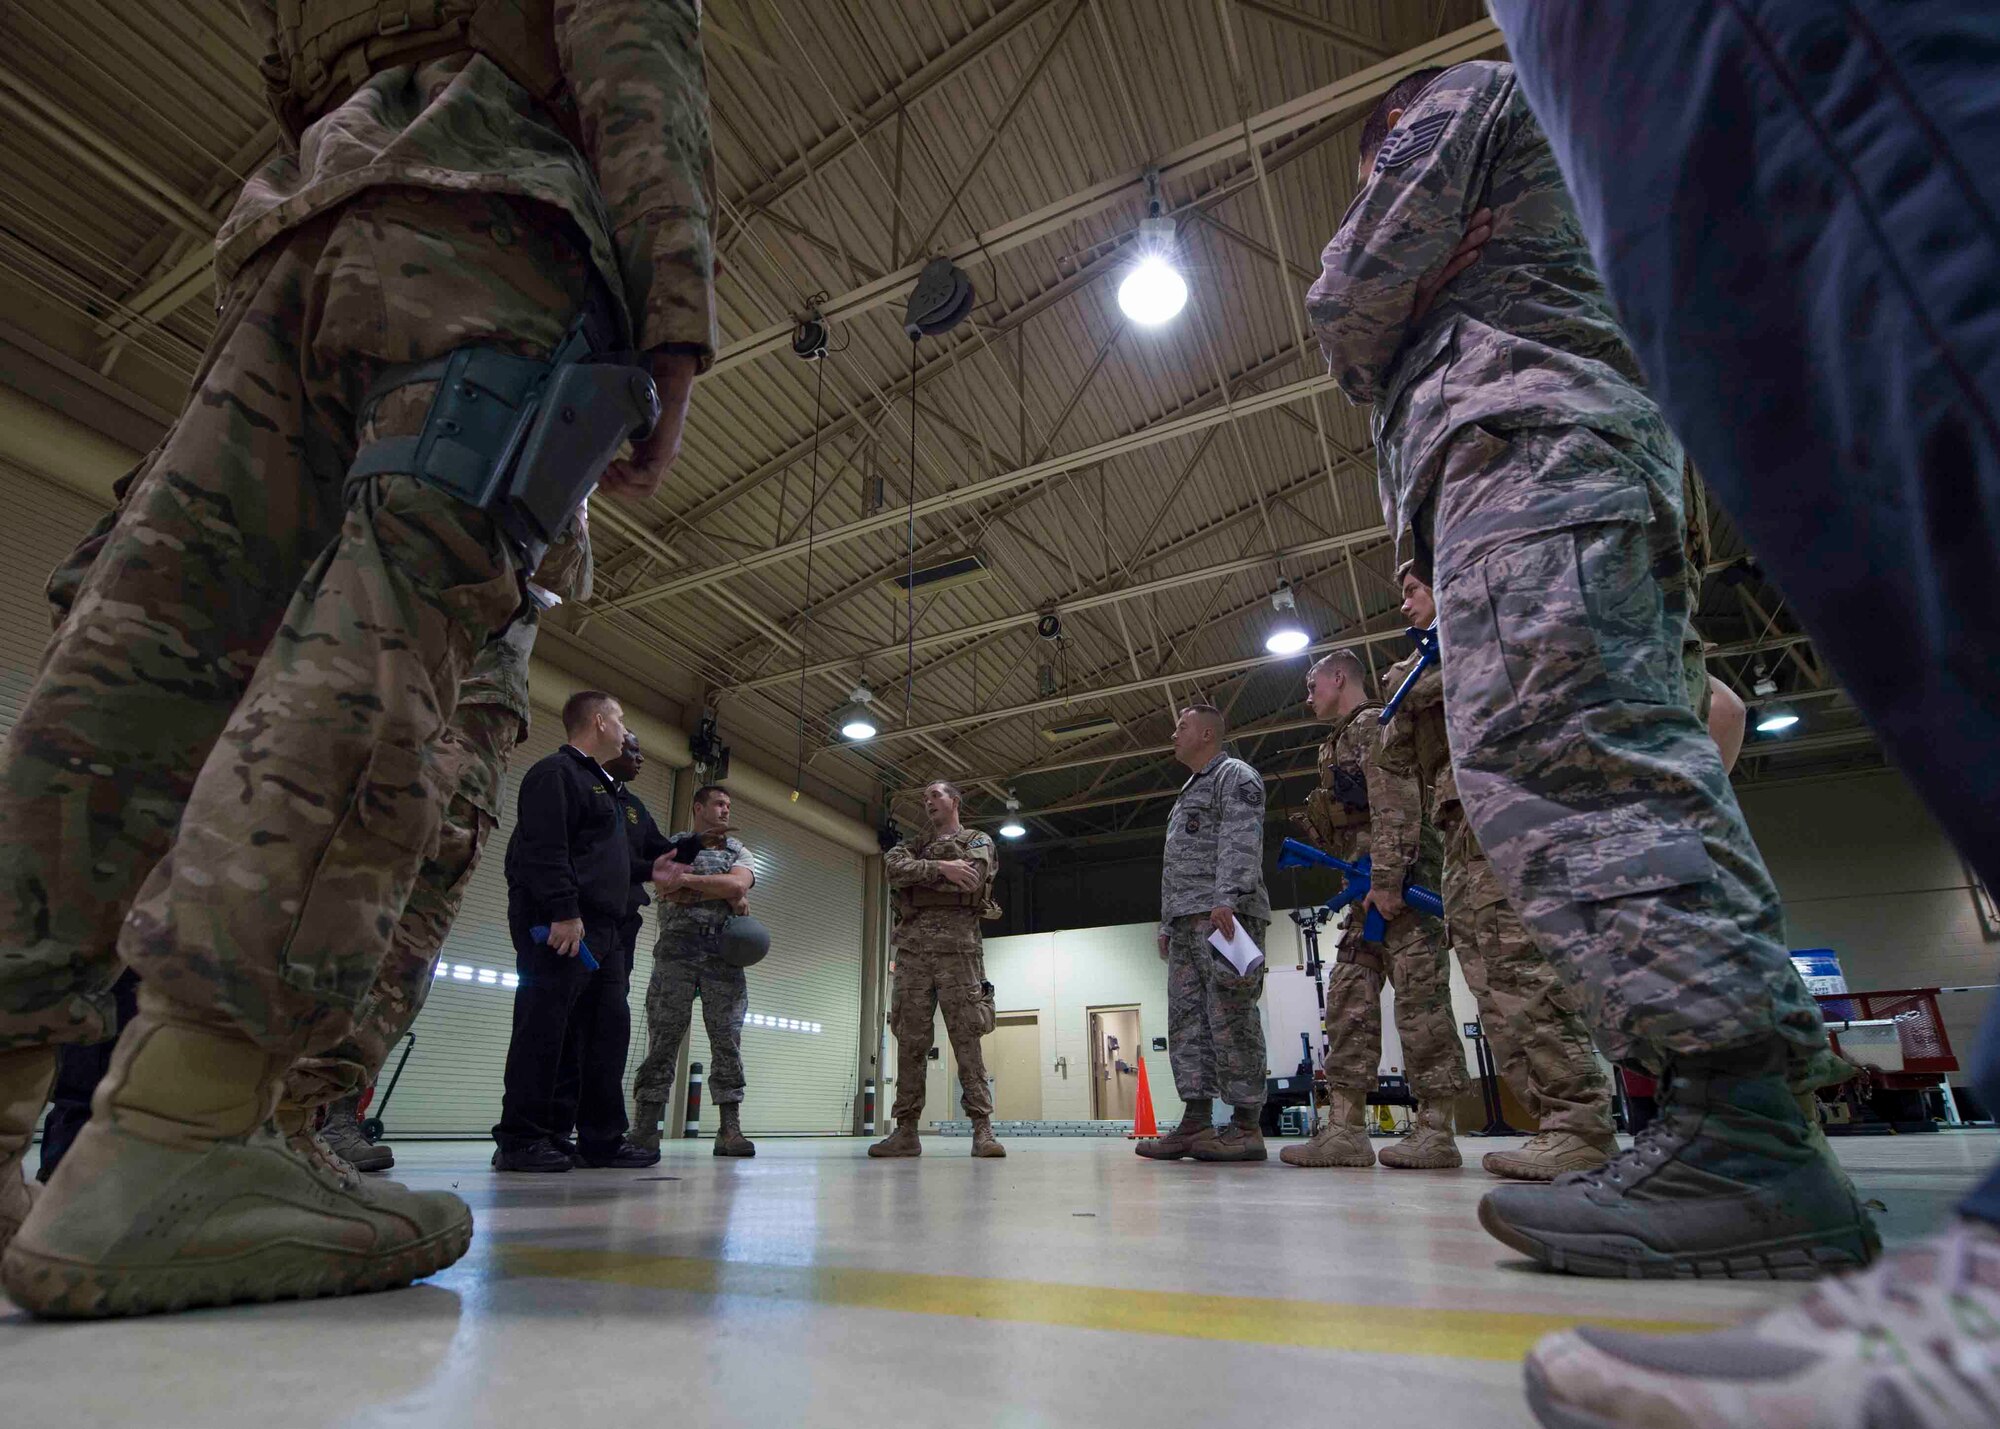 Air Commandos are briefed on new procedures for active shooter responses during multi-squadron training at Hurlburt Field, Fla., March 10, 2017. Air Commandos with the 1st Special Operations Security Forces Squadron, 1st Special Operations Civil Engineer Squadron and the 1st Special Operations Medical Group participated in an exercise to implement new procedures for tactical responders. (U.S. Air Force photo by Senior Airman Krystal M. Garrett)